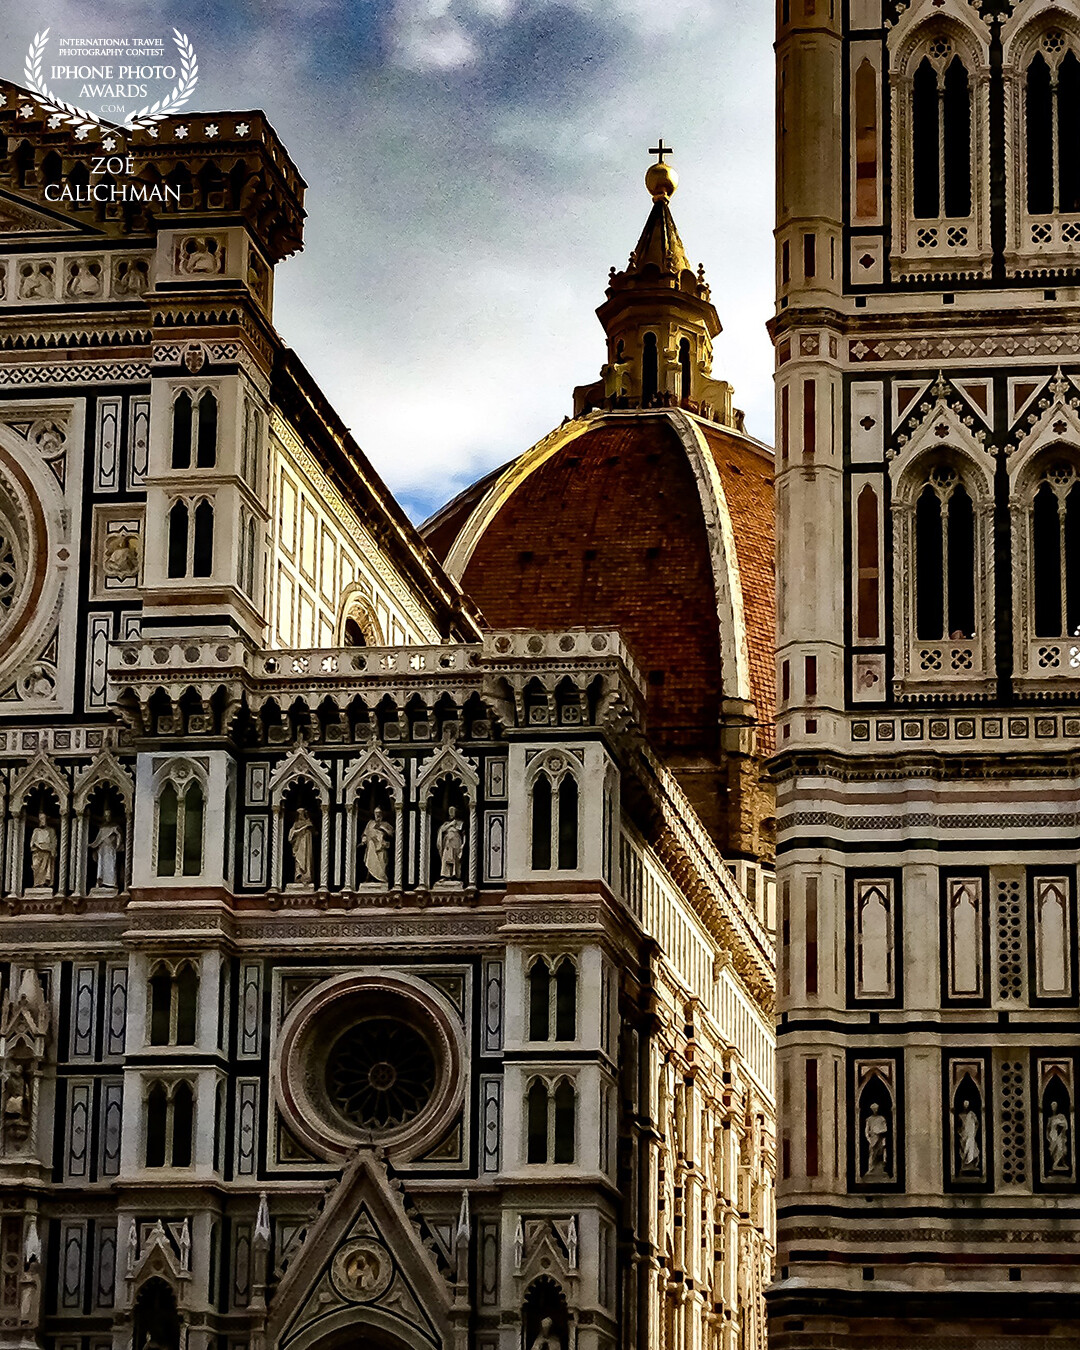 First trip to Florence.